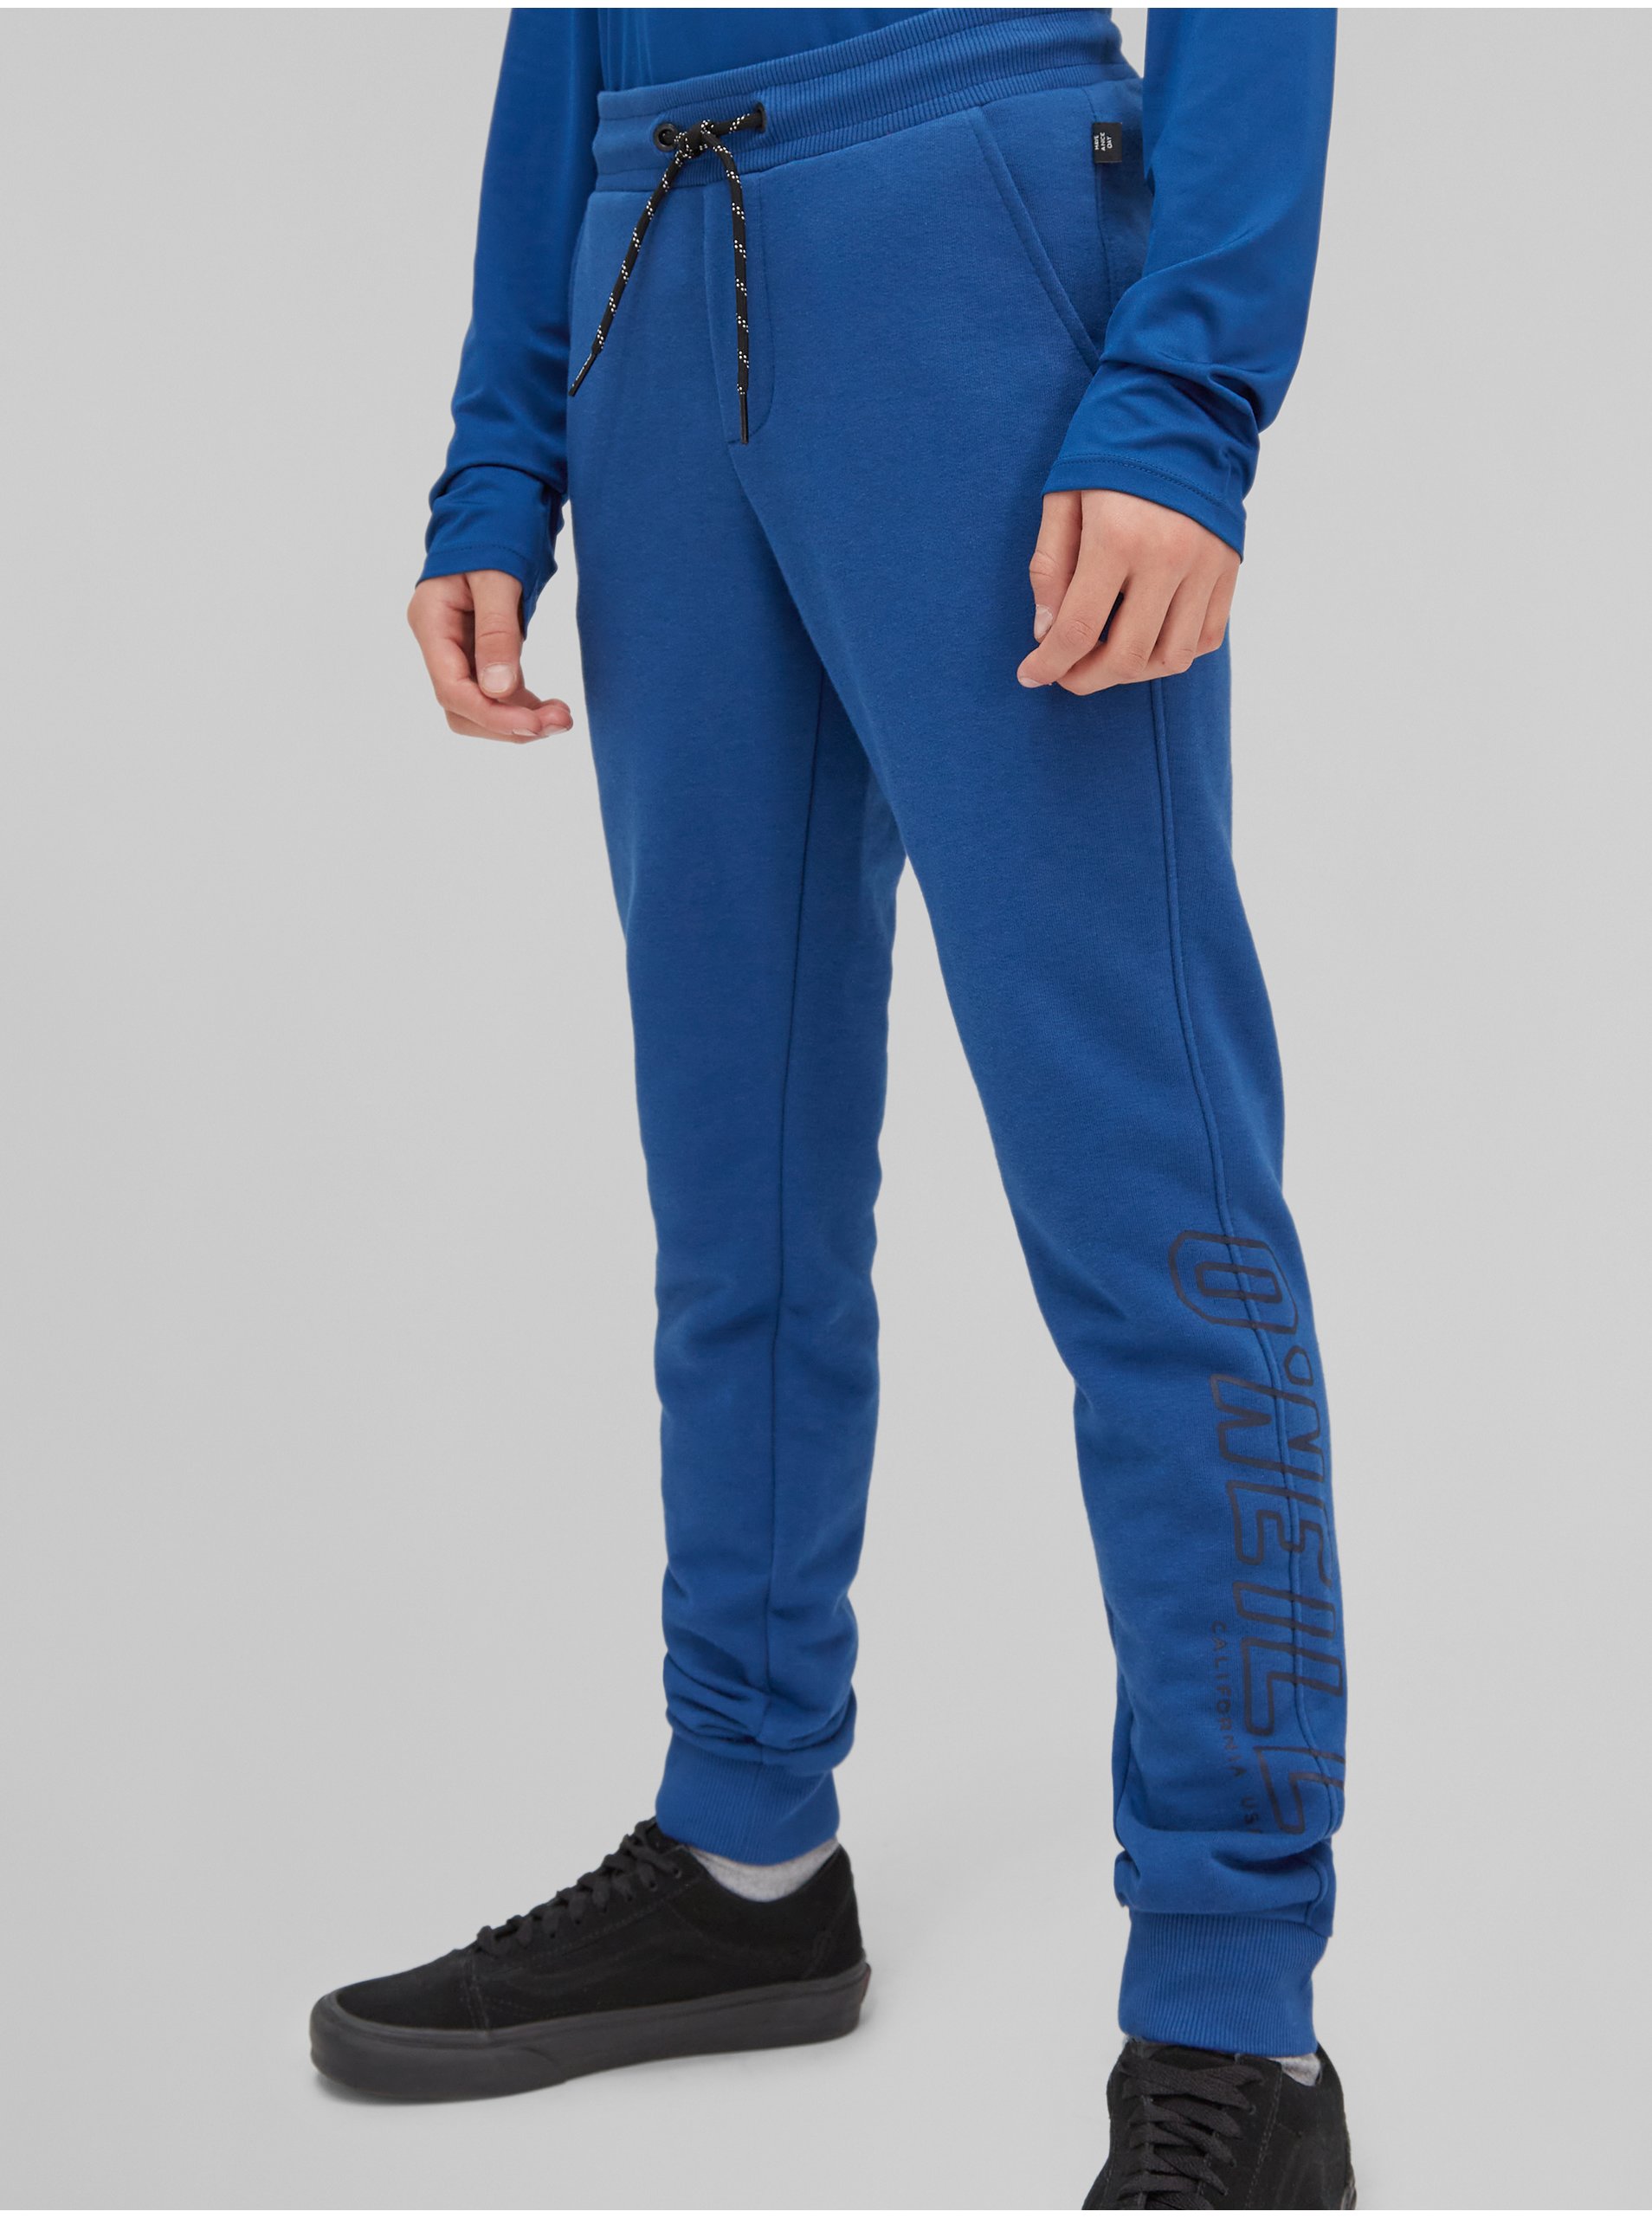 ONeill Blue Boys' Sweatpants with O'Neill All Year Jogger Pants